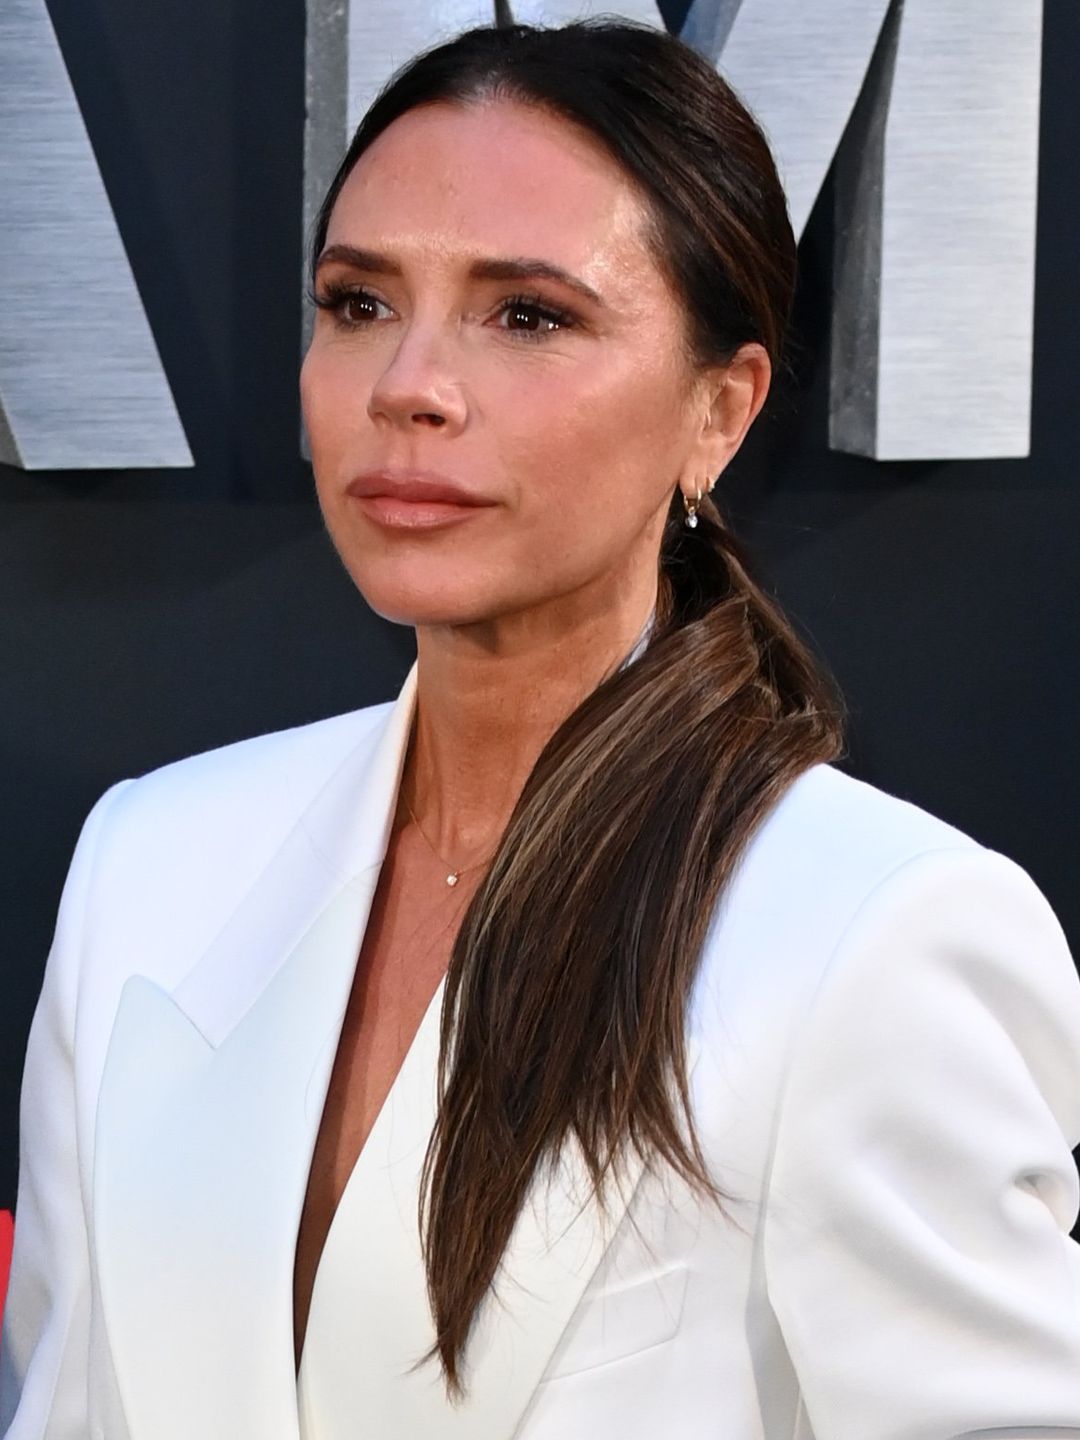 Victoria Beckham in all-white outfit